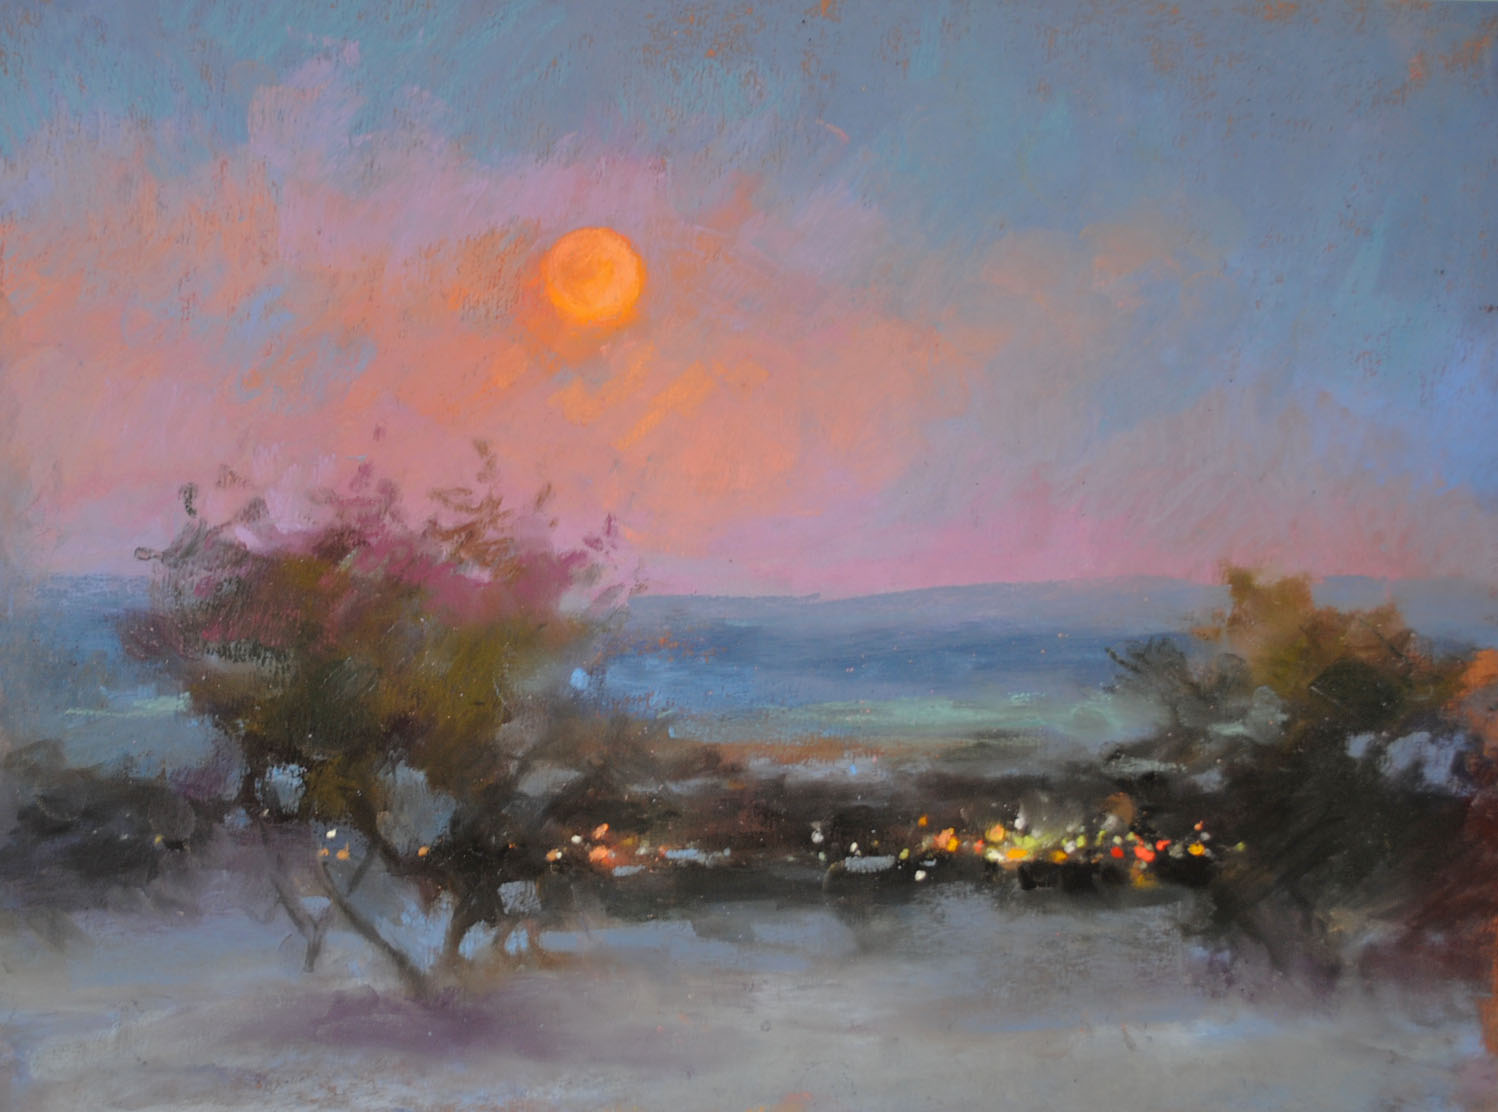 Nocturne - Christine Debrosky, "Smoky Moon," plein air, soft pastel on toned sanded paper, 9 x 12 in